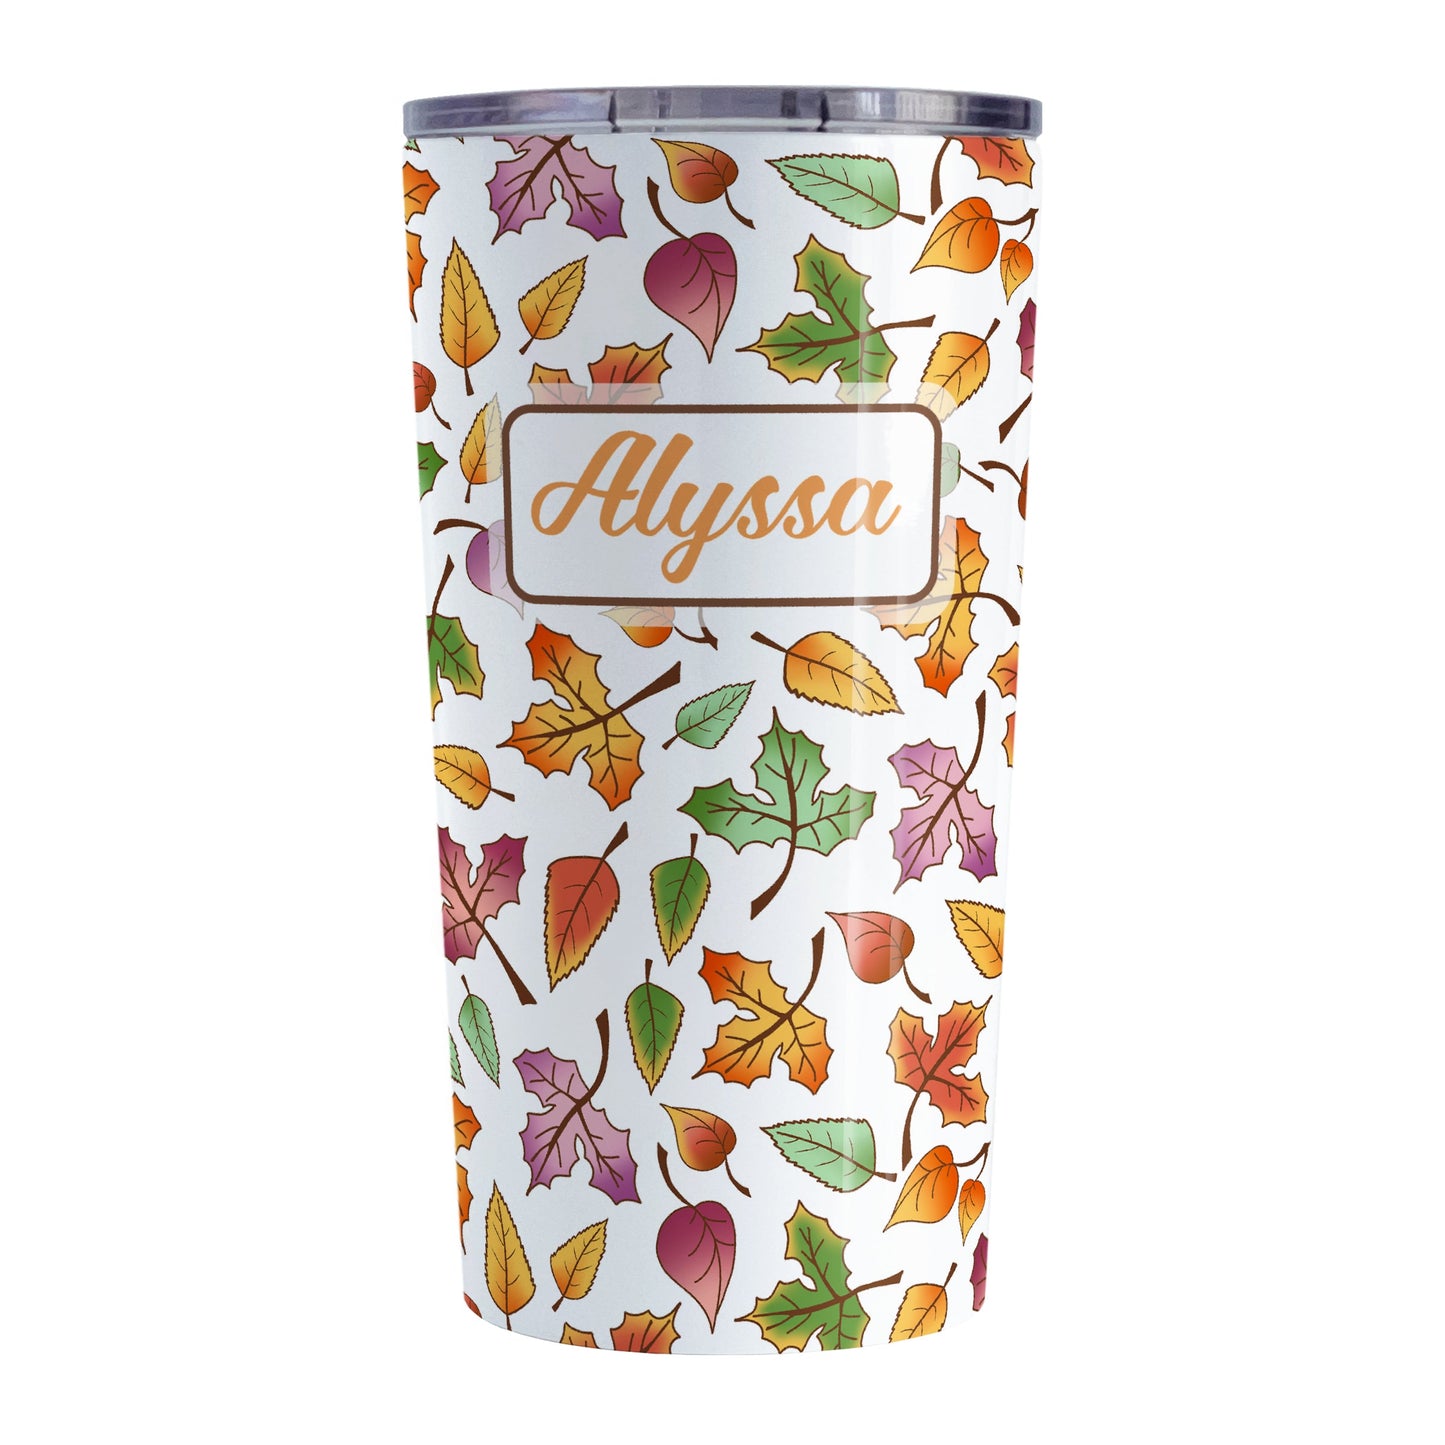 Personalized Changing Leaves Fall Tumbler Cup (20oz) at Amy's Coffee Mugs. A stainless steel insulated tumbler cup designed with a fall themed pattern of leaves changing colors, as they do at the beginning of autumn, that wraps around the cup. Your personalized name is custom printed in an orange script font in a white rectangle over the leaves pattern. 